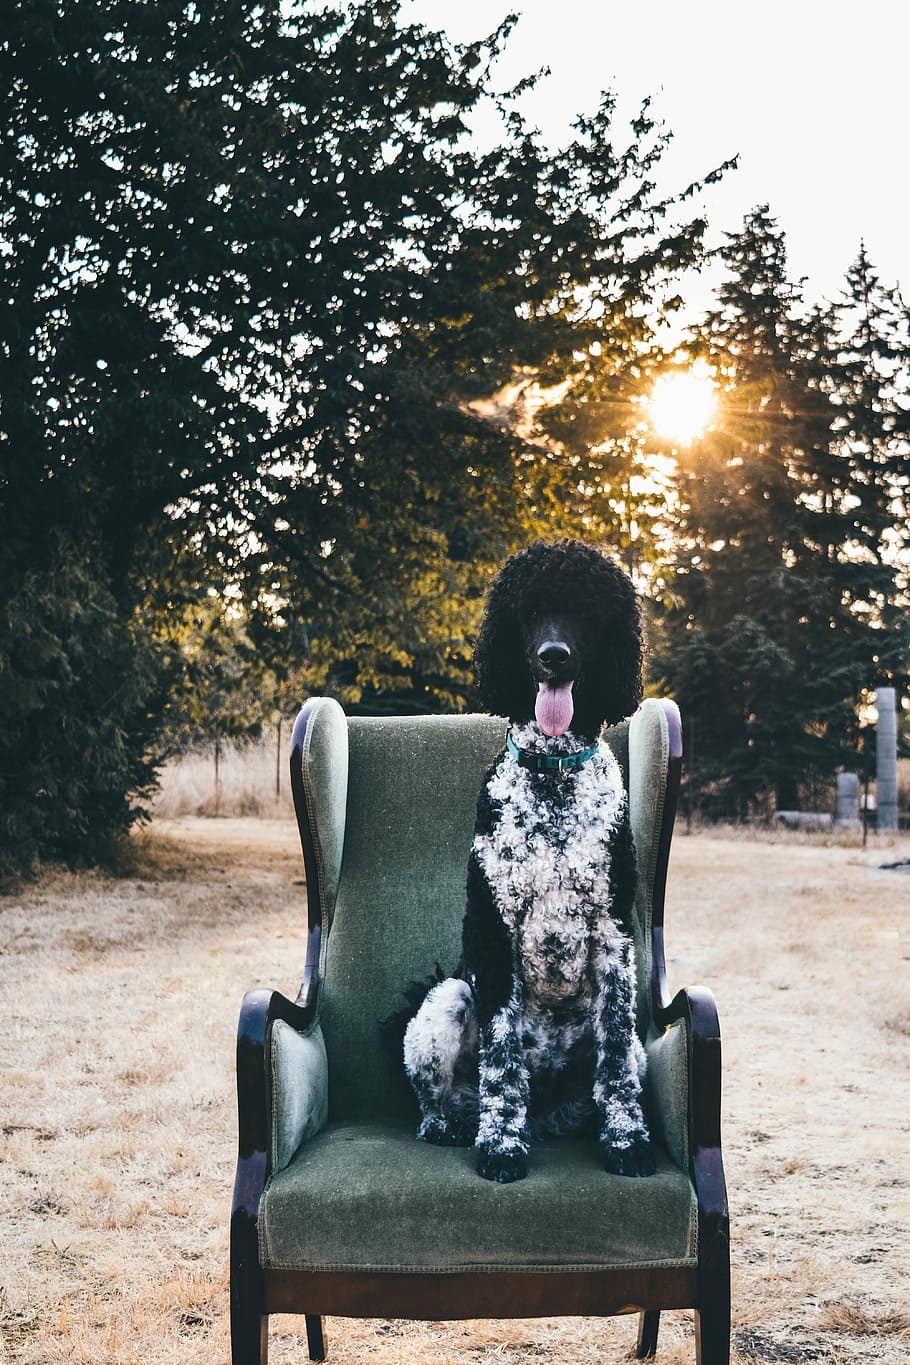 black poodle on gray armchair, adult black and white standard poodle sitting on green and brown wooden frame wing chair near trees at daytime, HD wallpaper